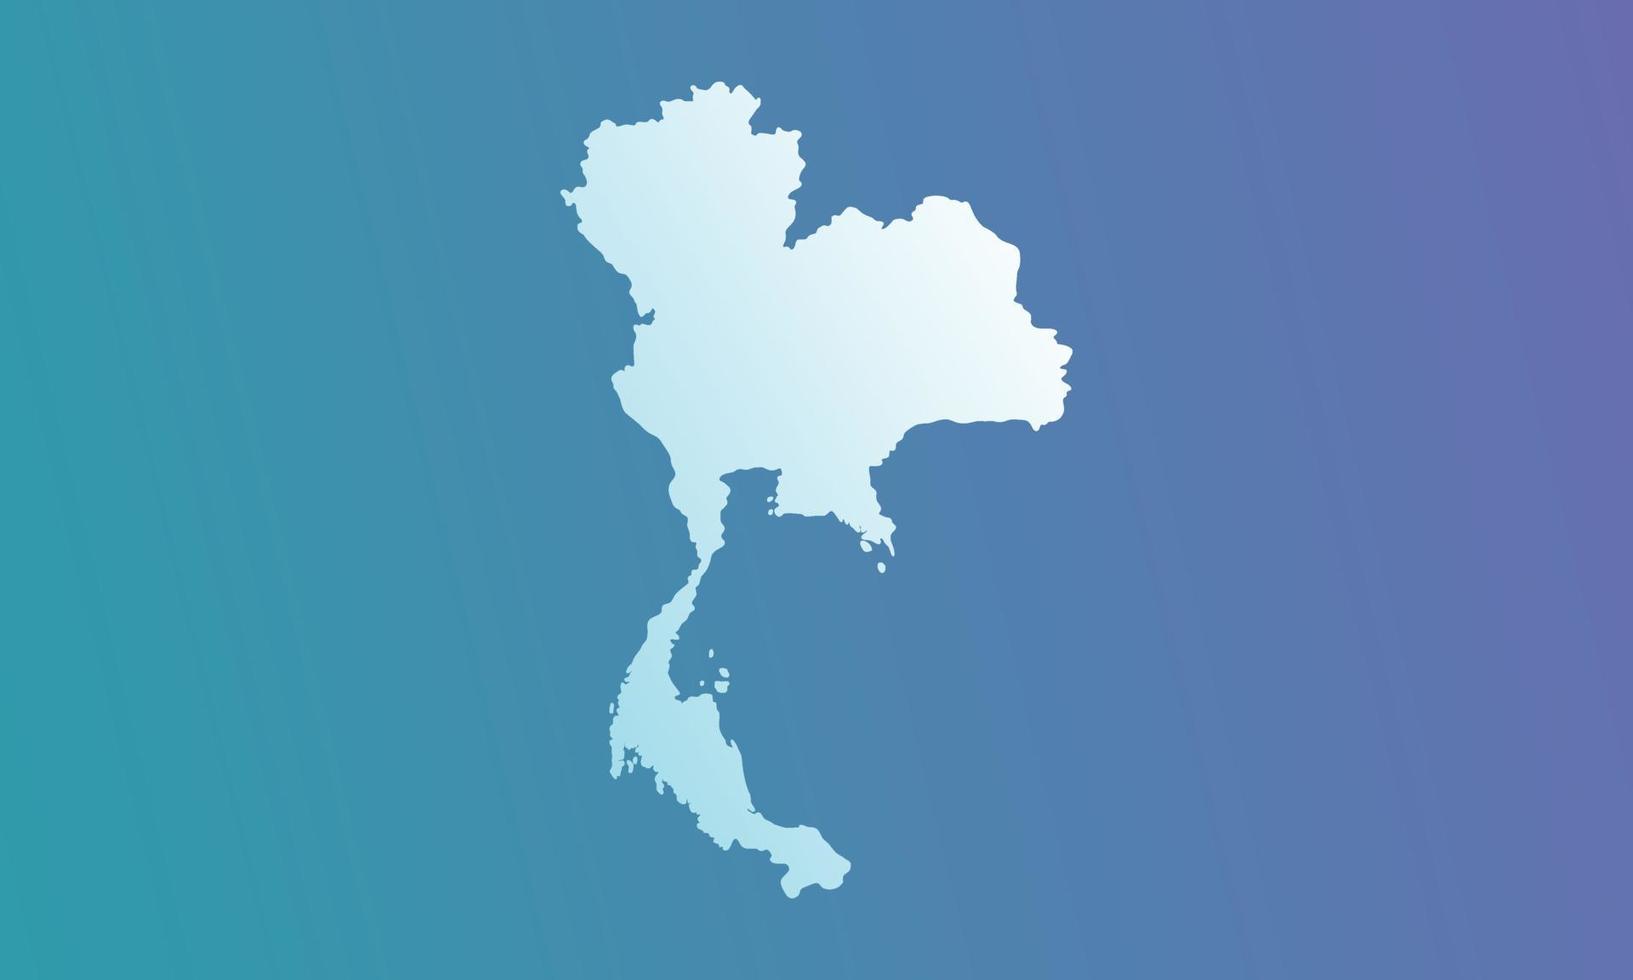 Thailand background with blue and purple gradient vector